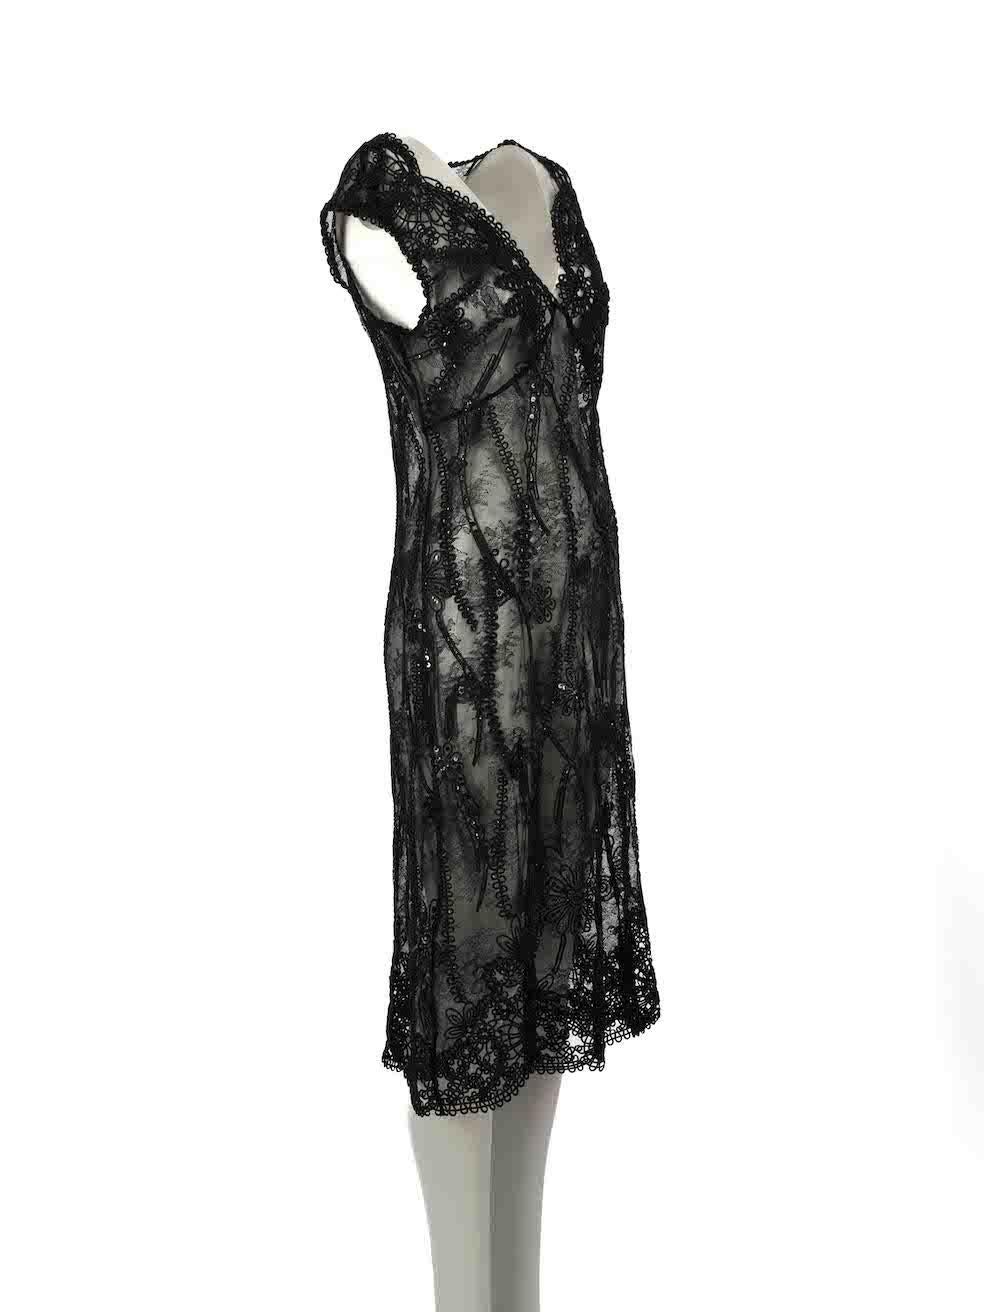 CONDITION is Never worn, with tags. No visible wear to dress is evident on this new Dana Pisarra designer resale item.
 
Details
Black
Synthetic lace
Dress
Midi
See through
Sleeveless
V-neck
Sequin embellished
Floral pattern
 
Made in Italy
